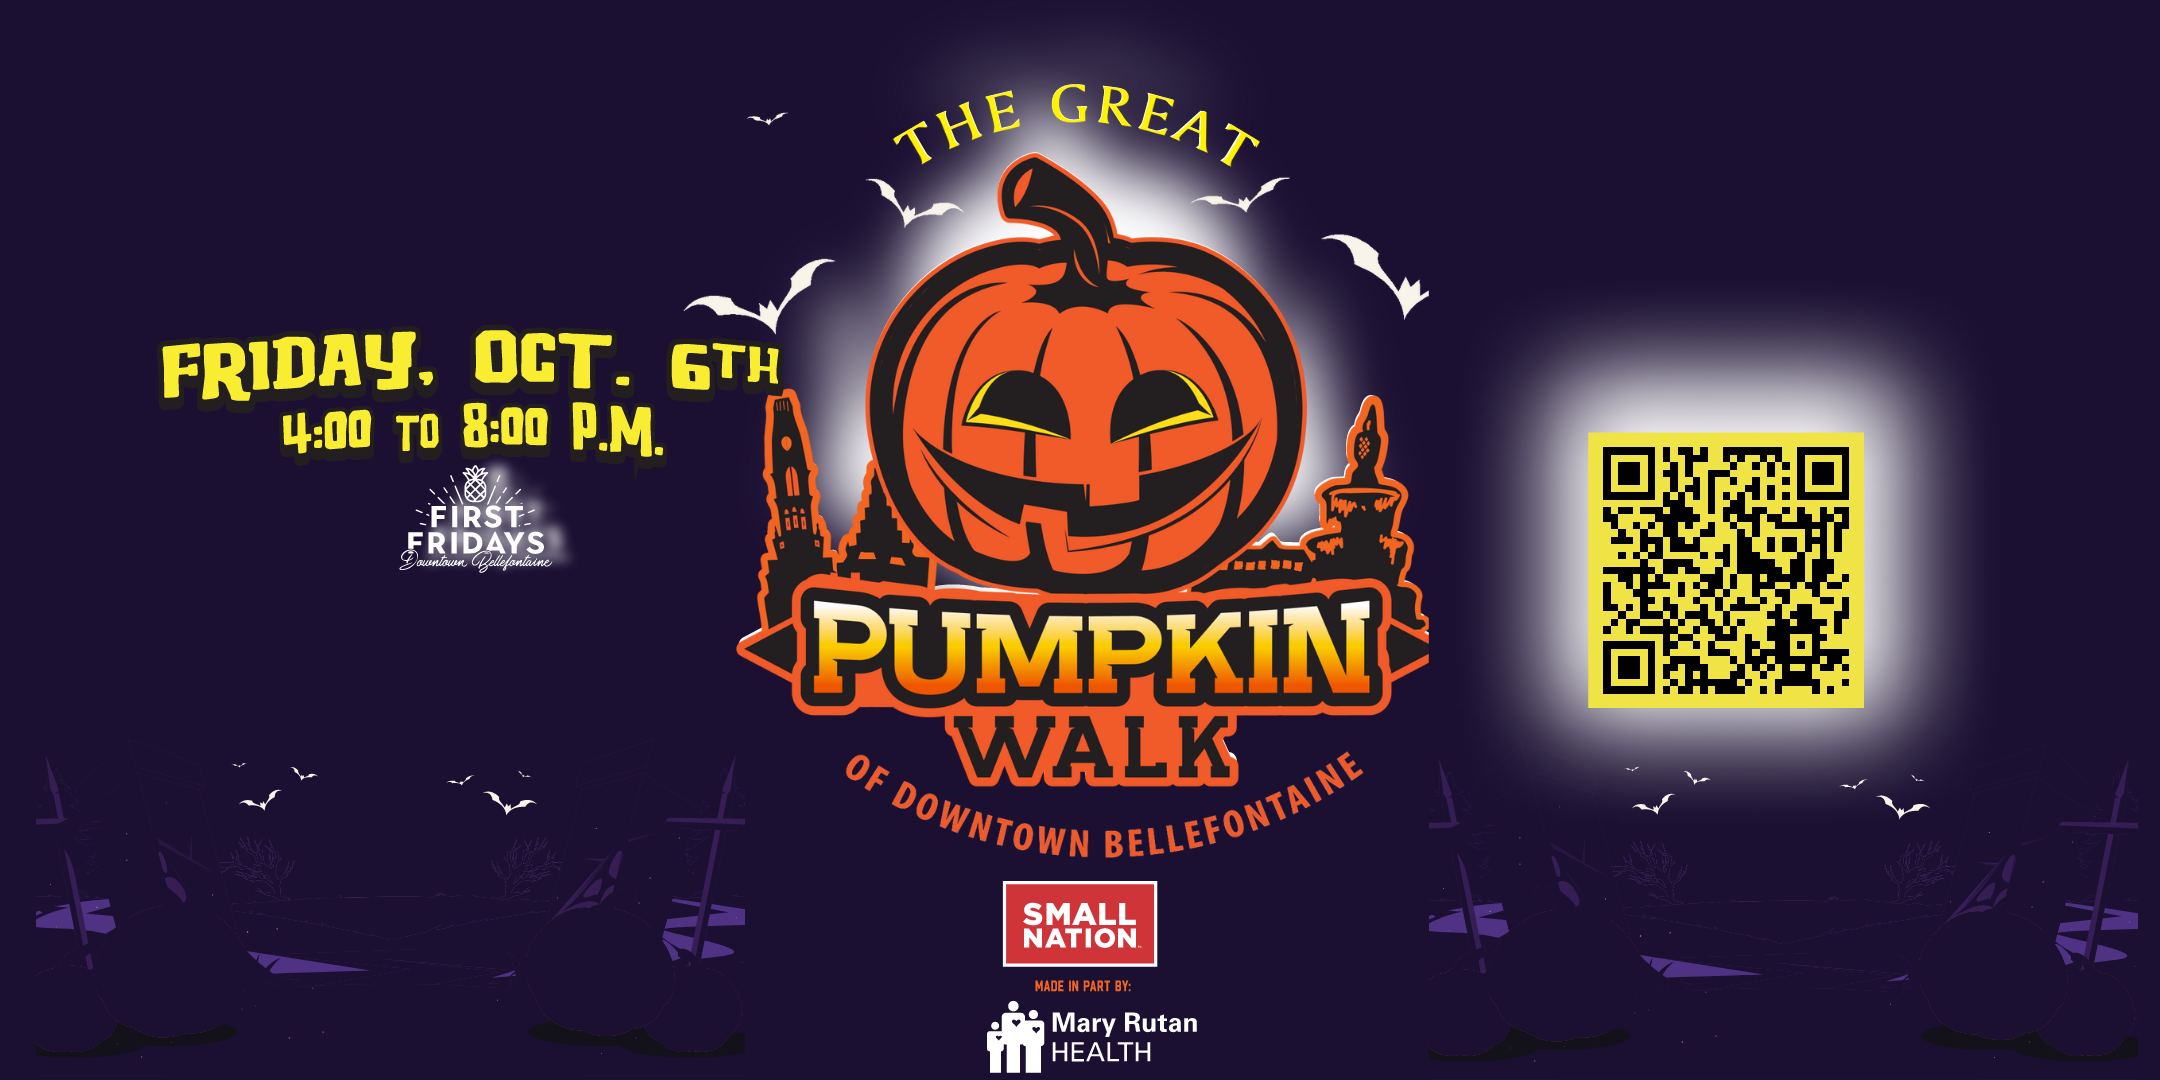 The Great Pumpkin Walk of Downtown Bellefontaine, presented by Small Nation